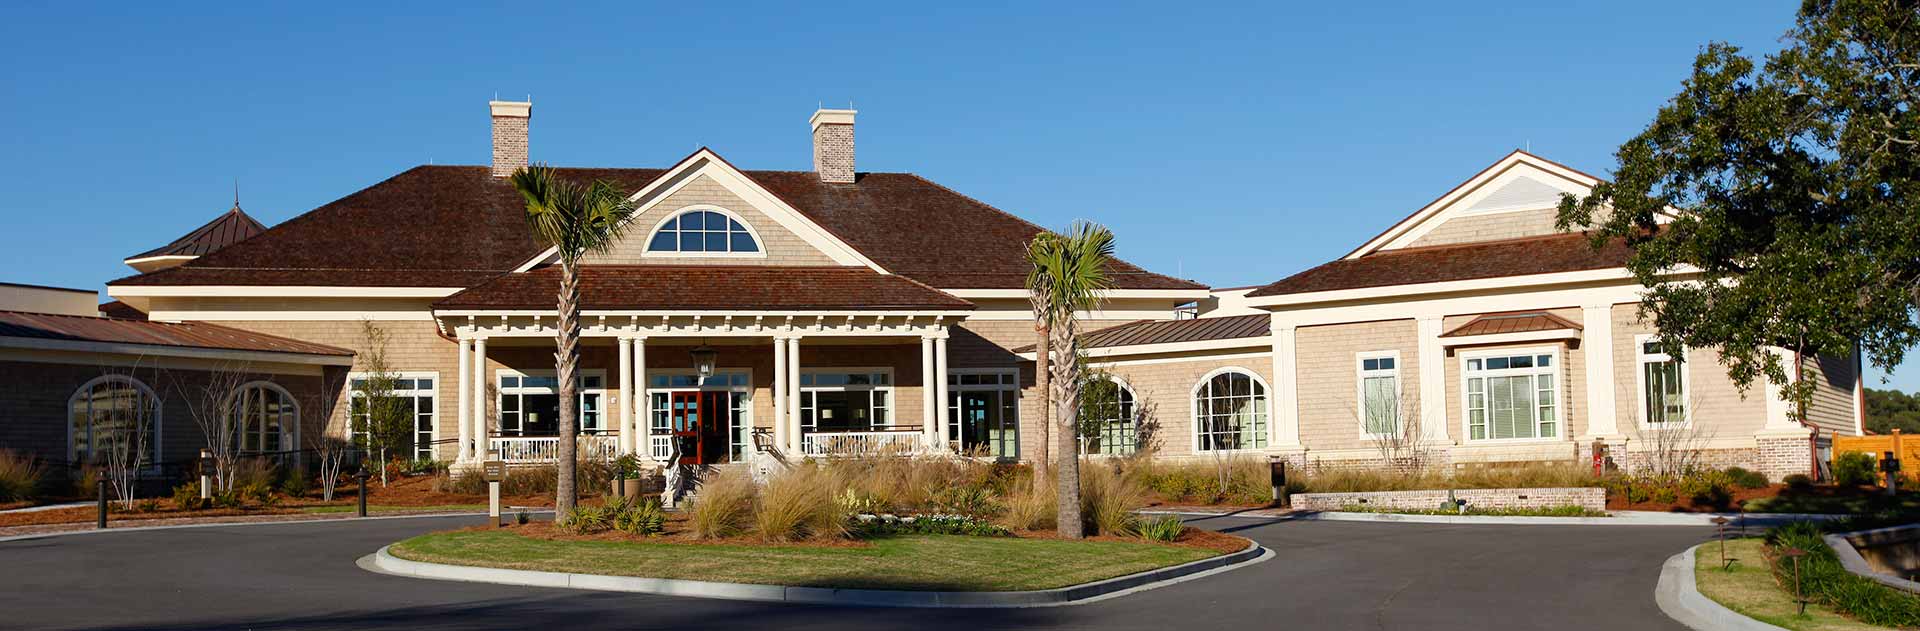 Sea Pines Plantation Clubhouse